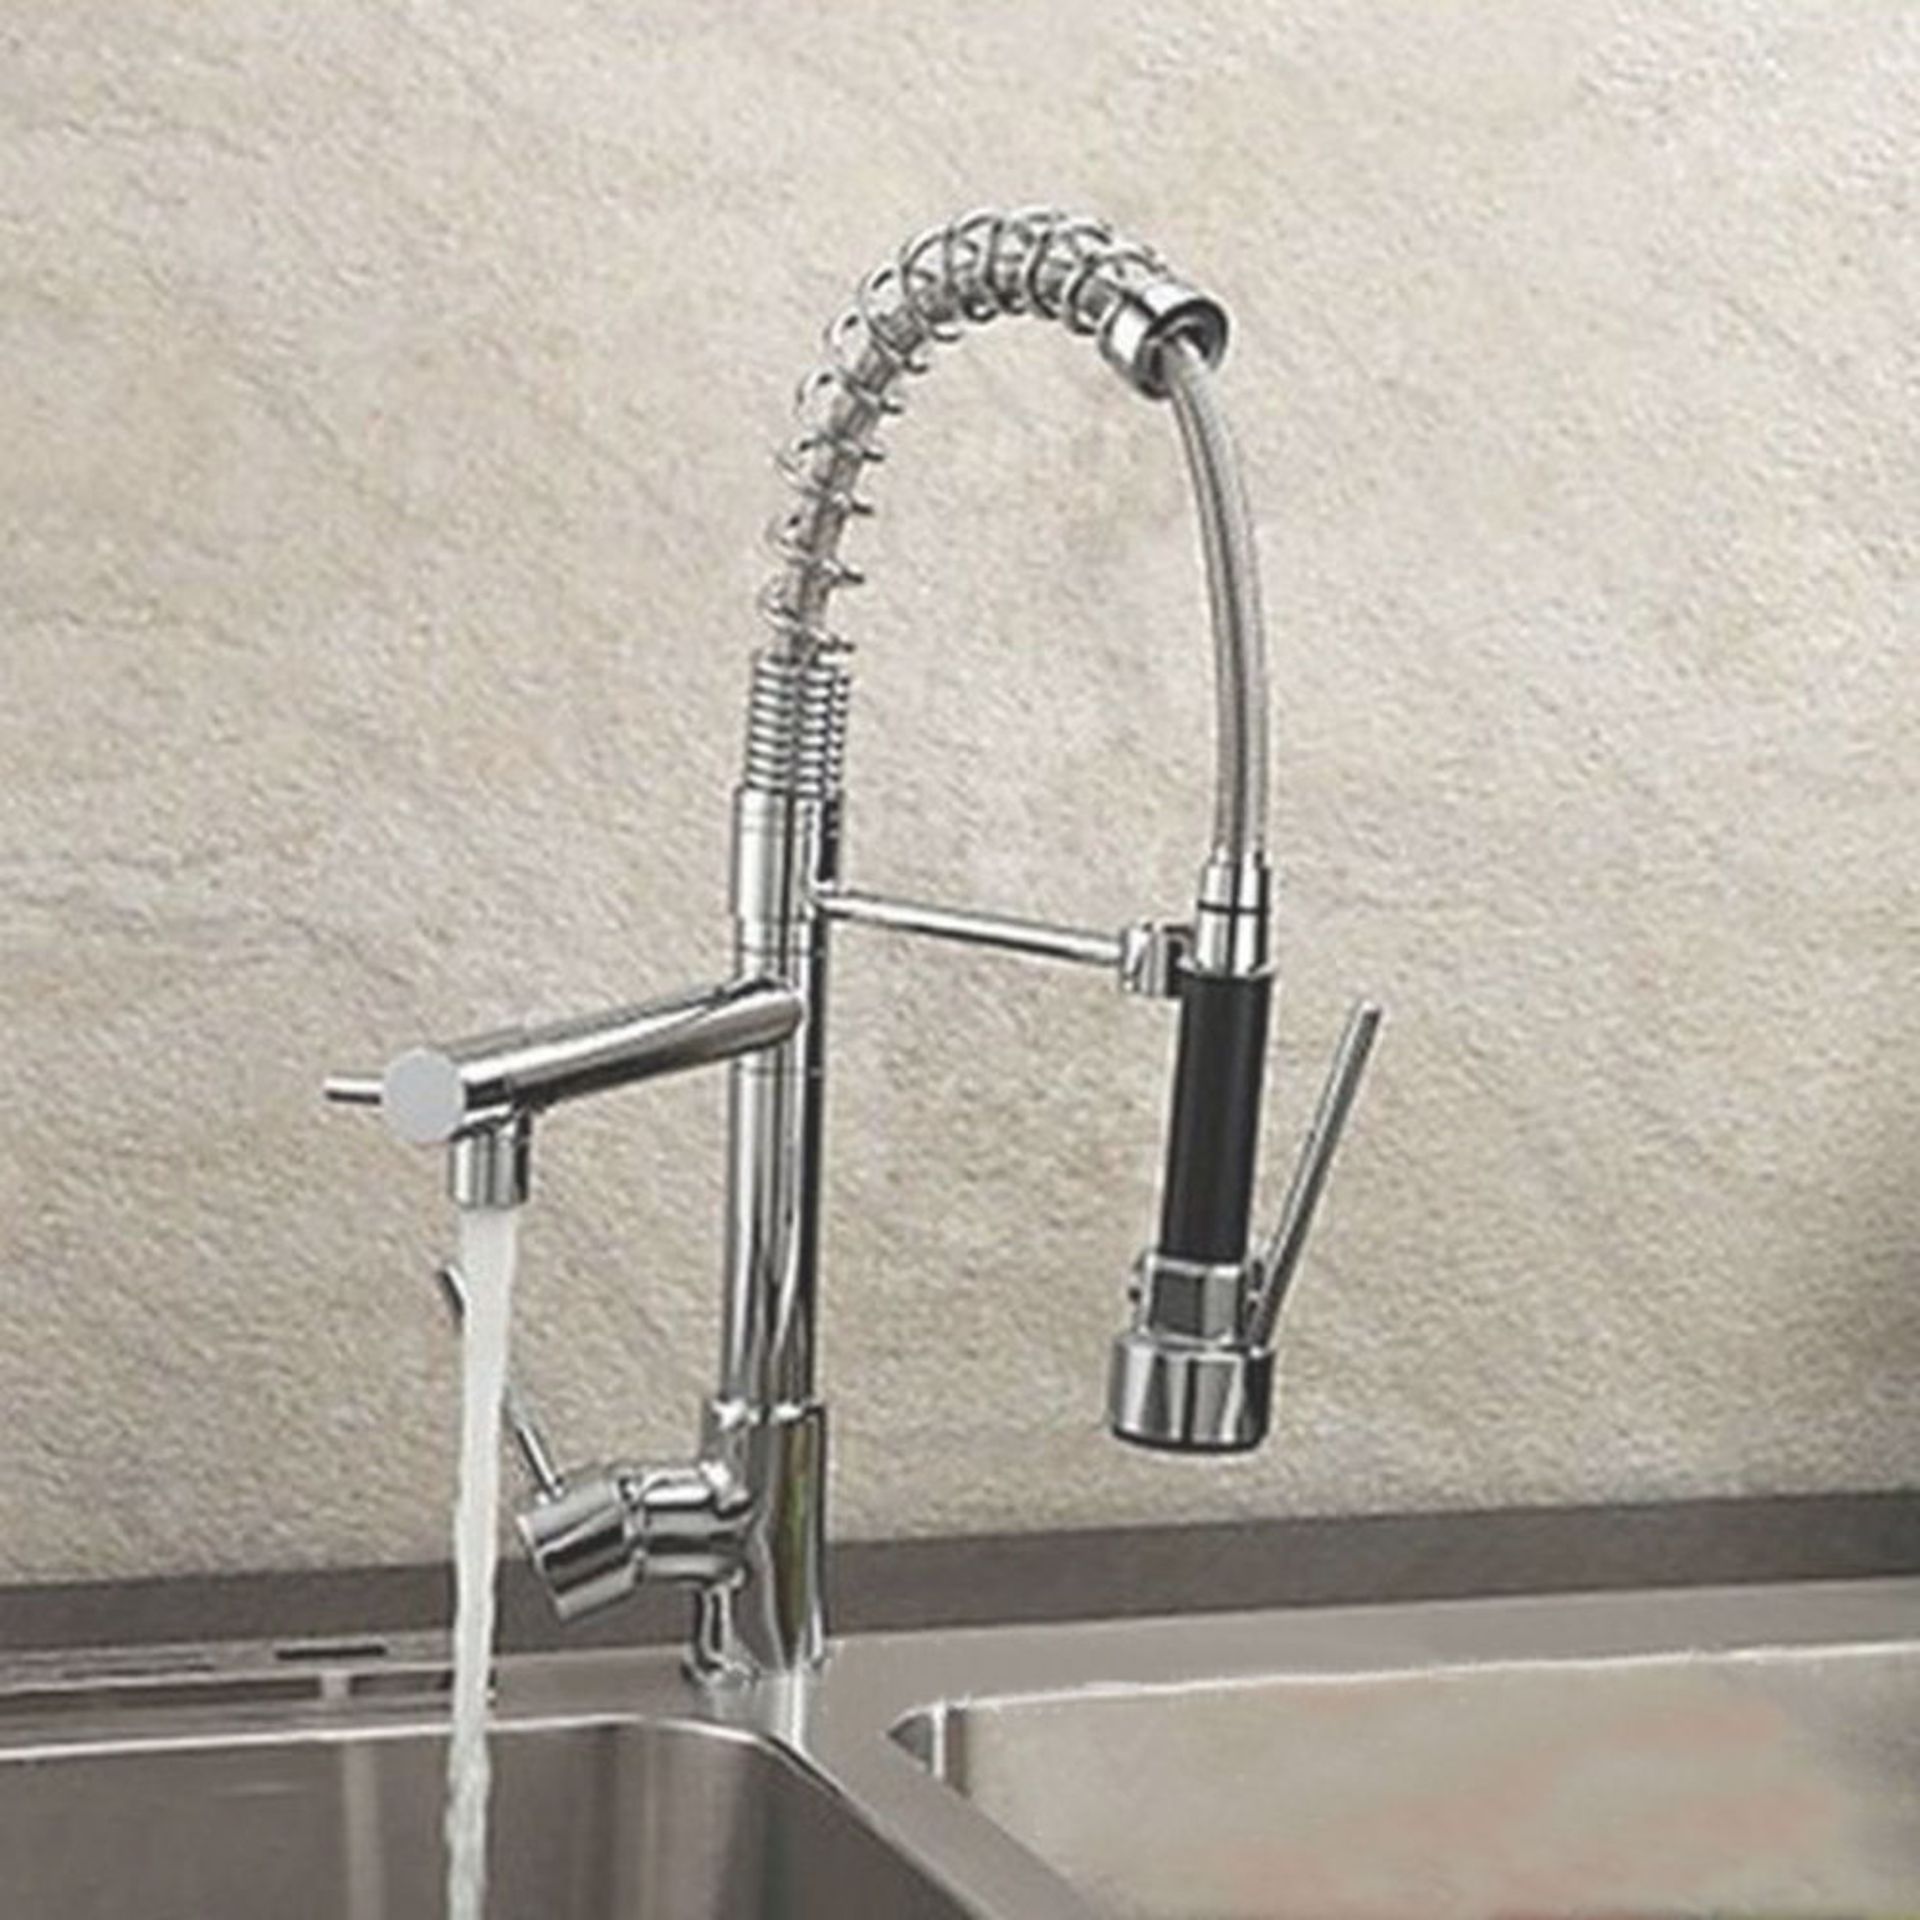 (PJ279) Bentley Modern Monobloc Chrome Brass Pull Out Spray Mixer Tap. RRP £349.99. This tap is from